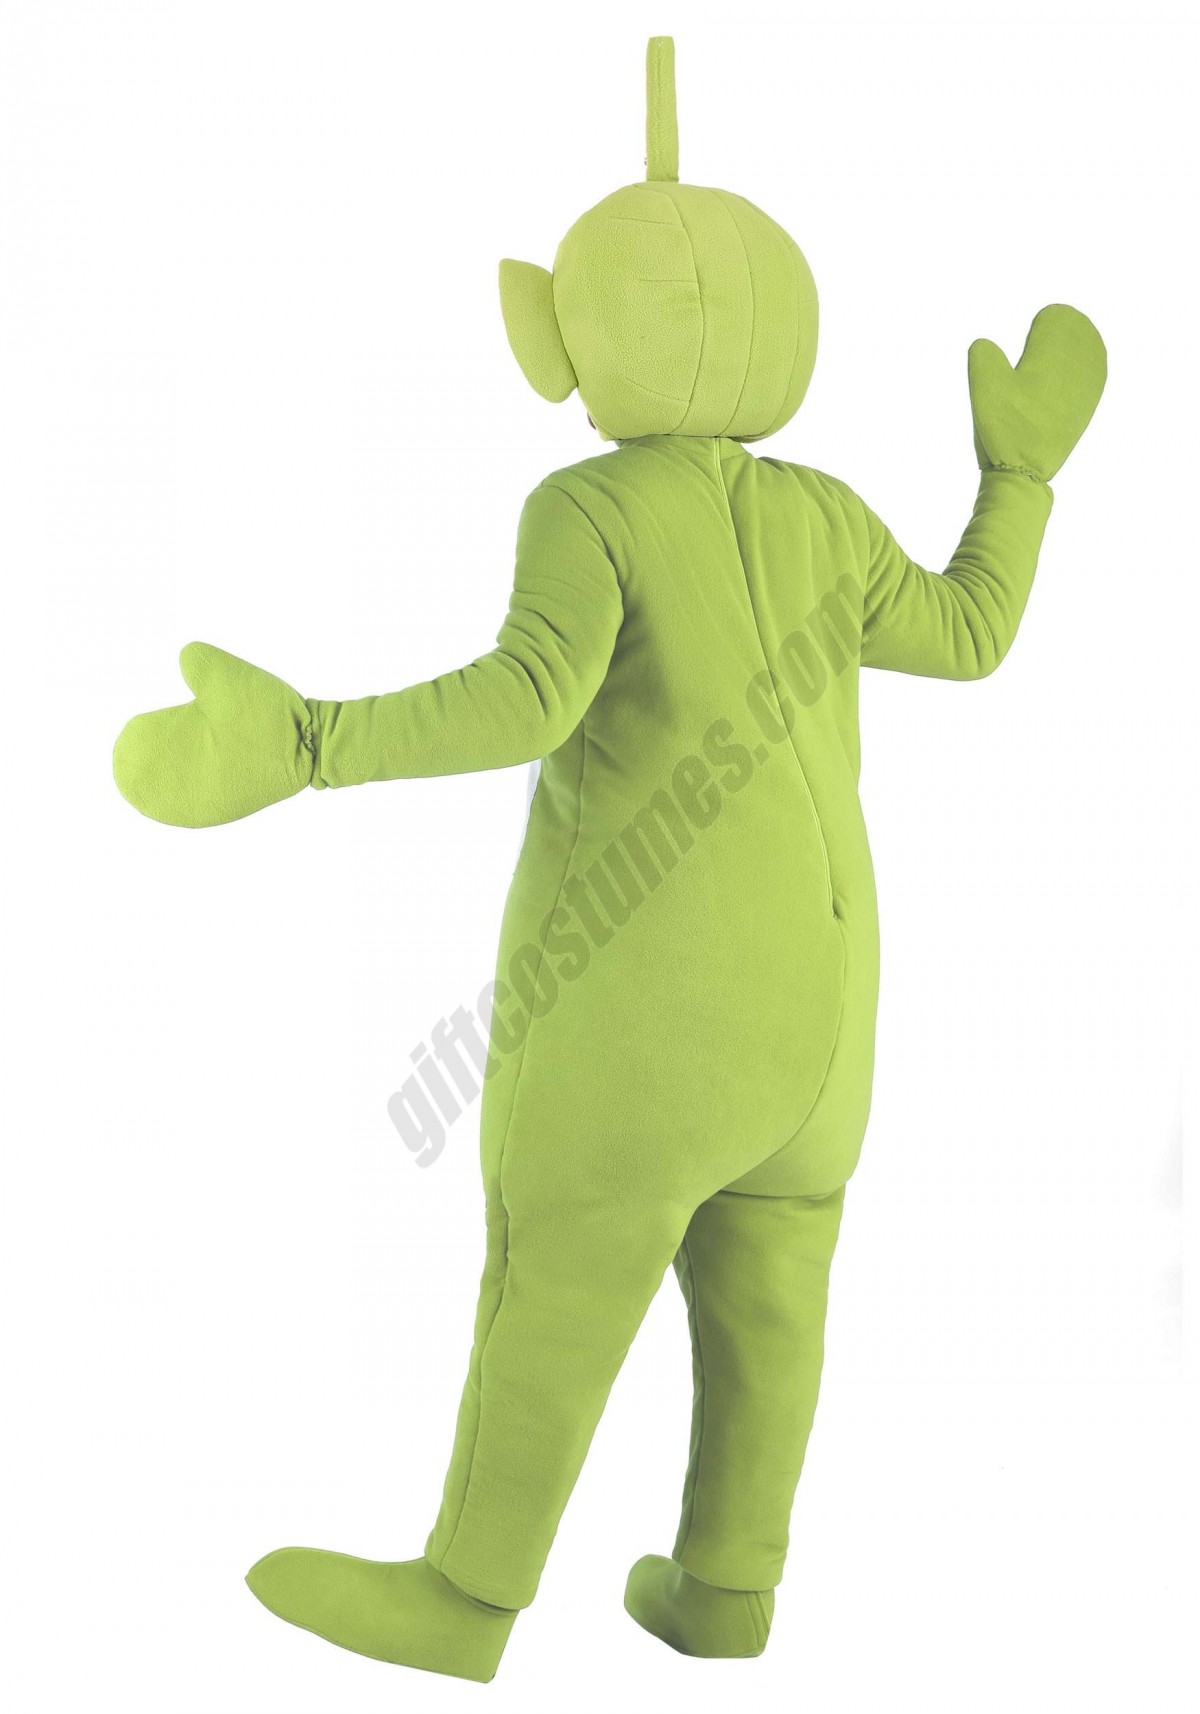 Teletubbies Dipsy Costume for Adults Promotions - -1